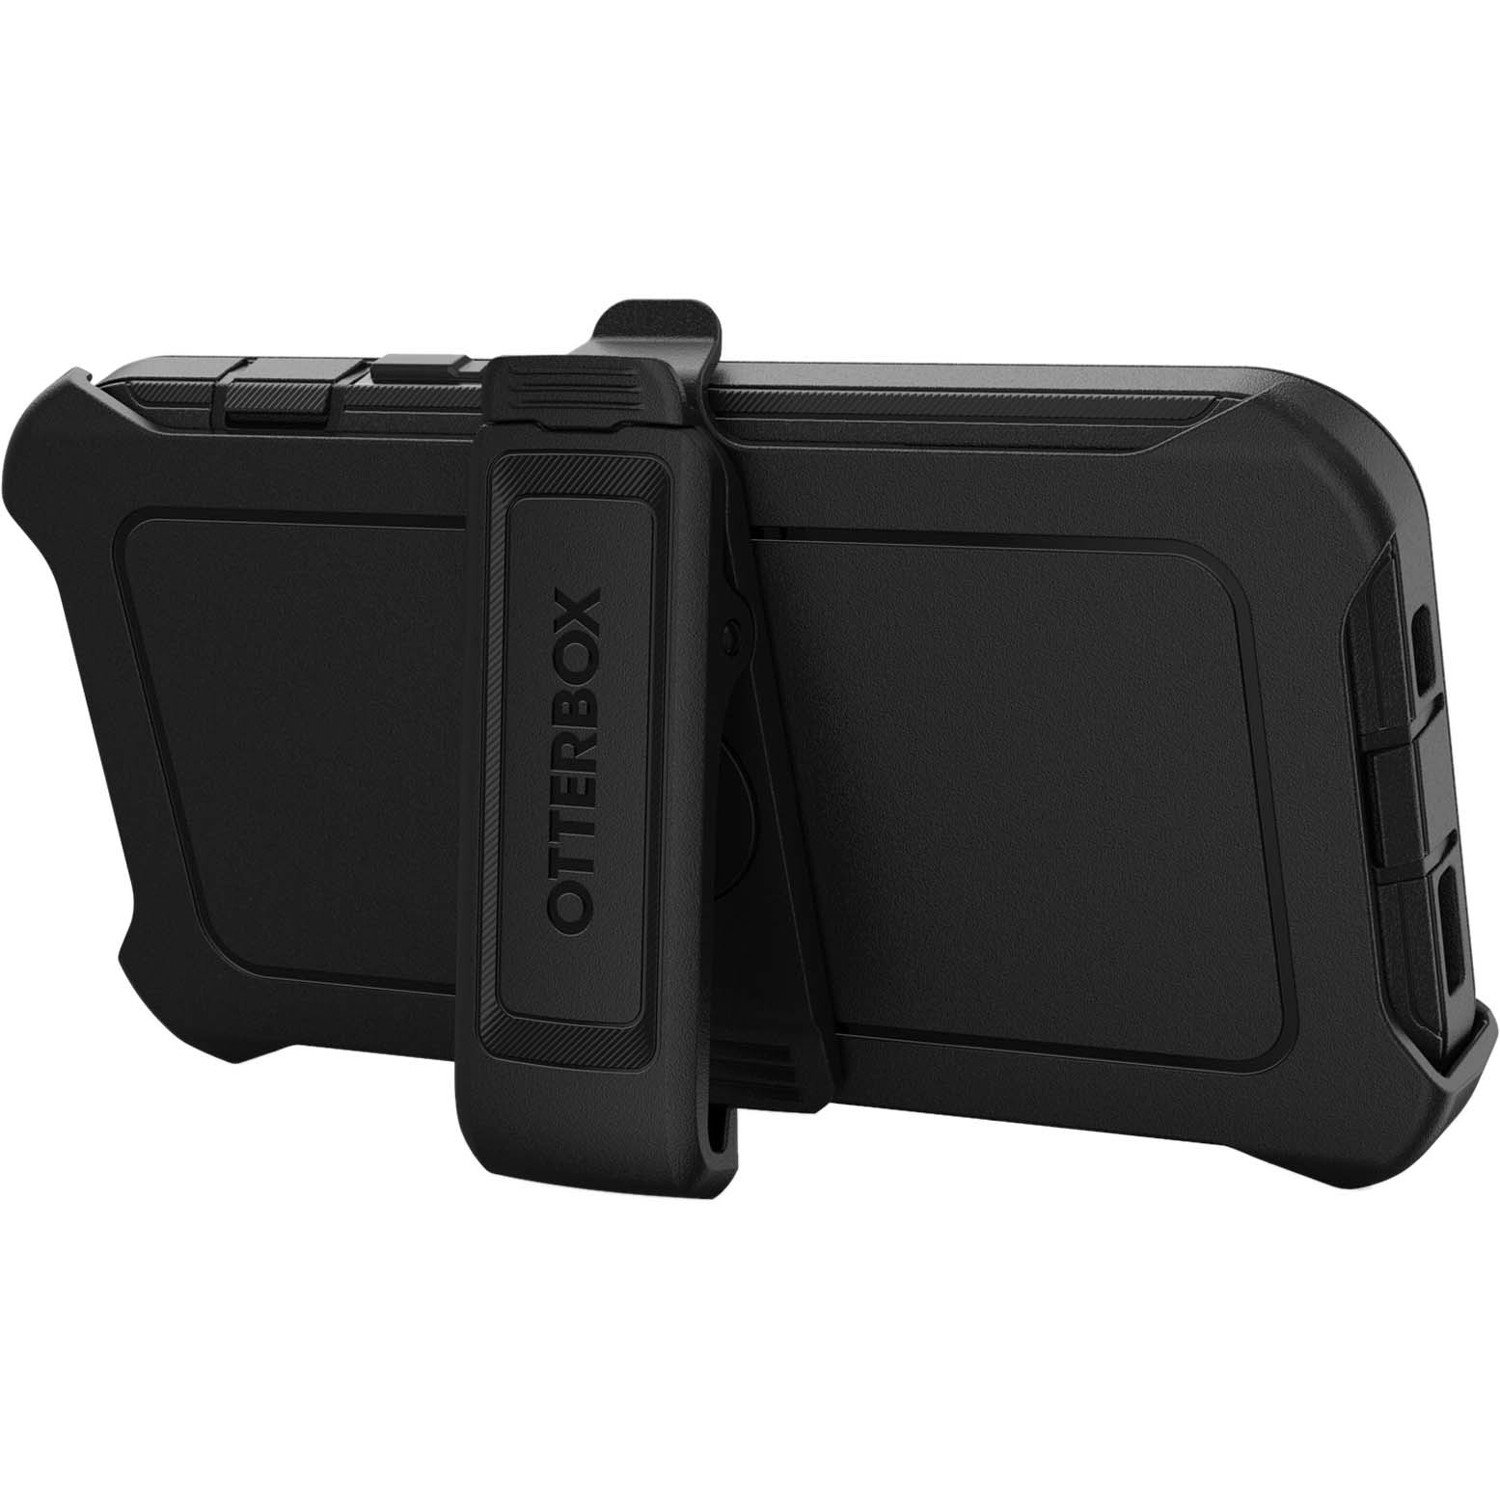 OtterBox Defender Rugged Carrying Case (Holster) Apple iPhone 13, iPhone 14 - Black